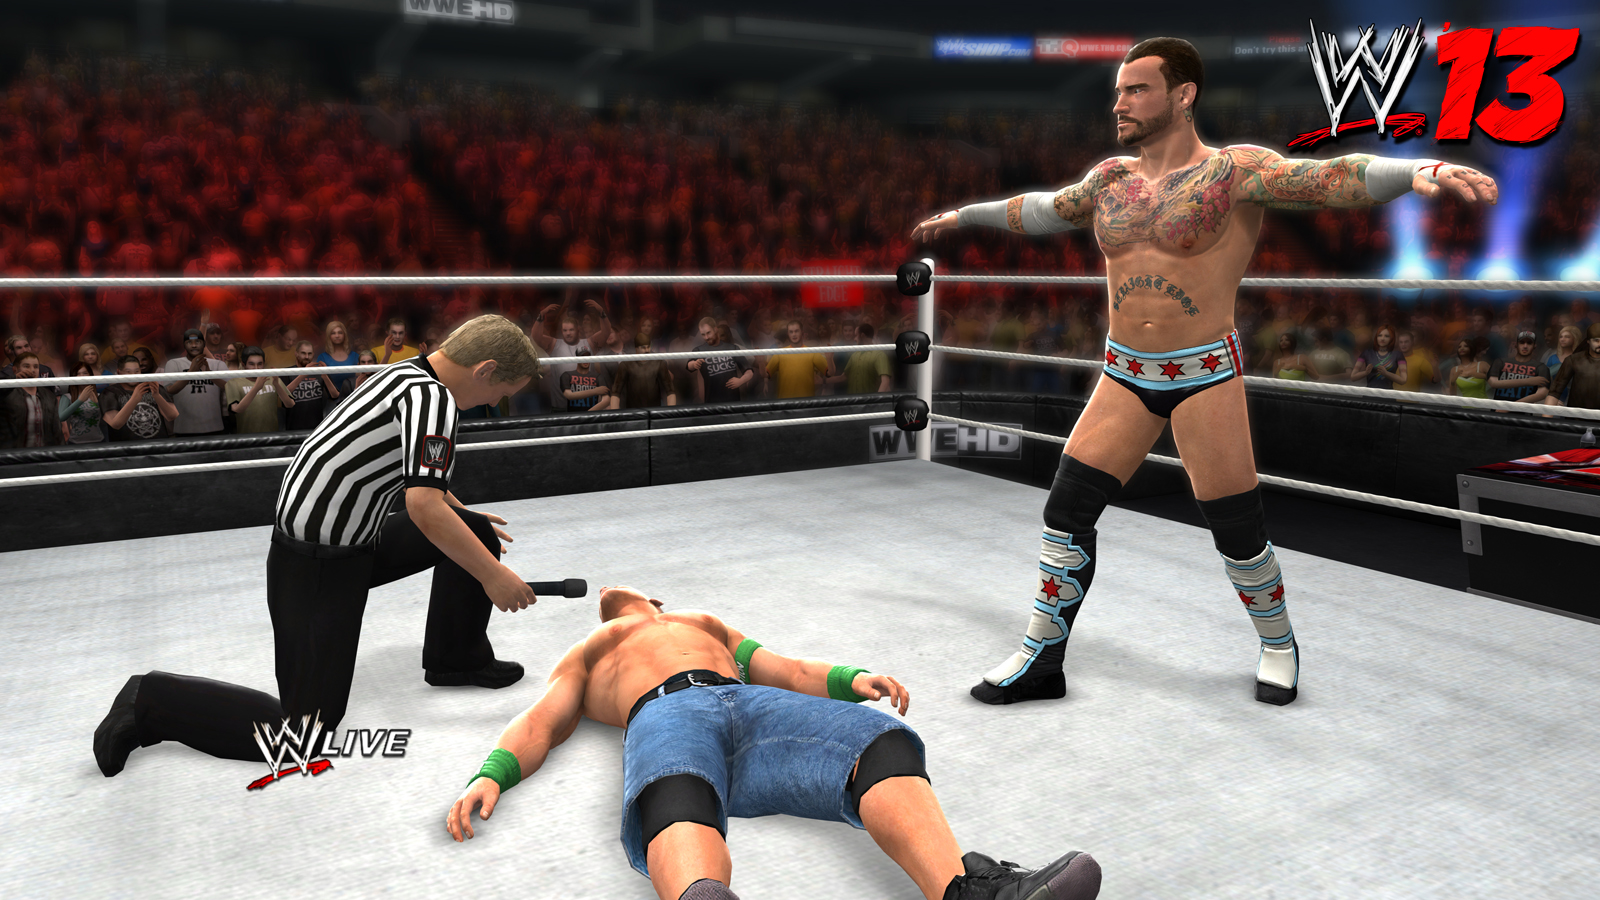 Wwe 2k13 Download For Ppsspp